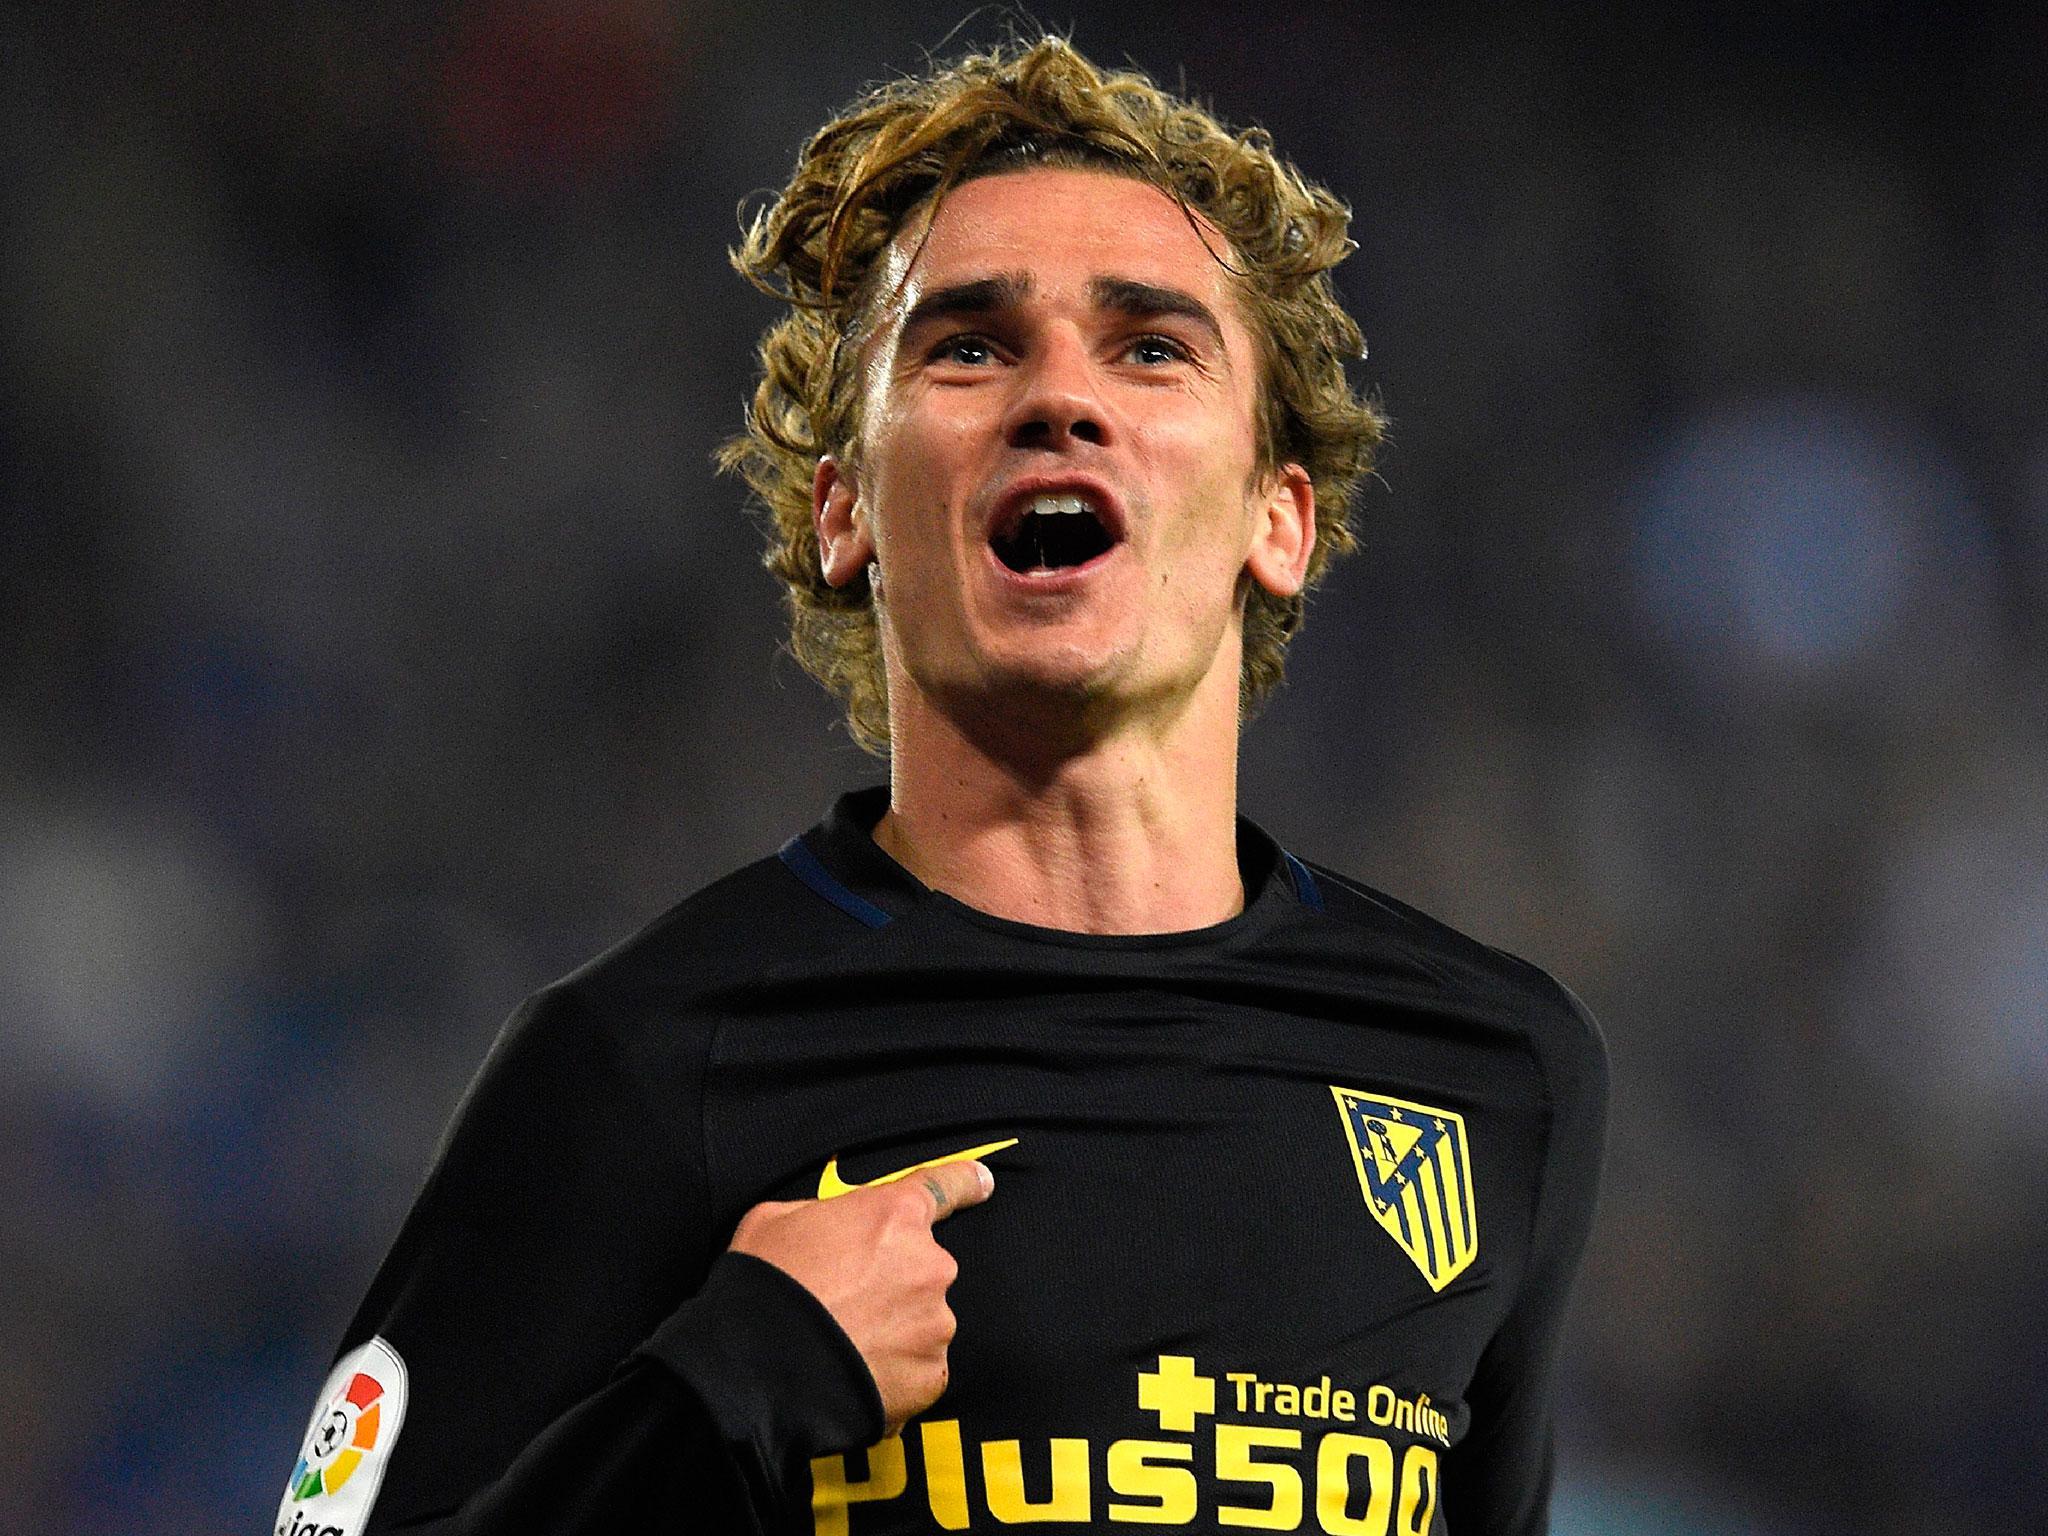 Griezmann has long been a target for United